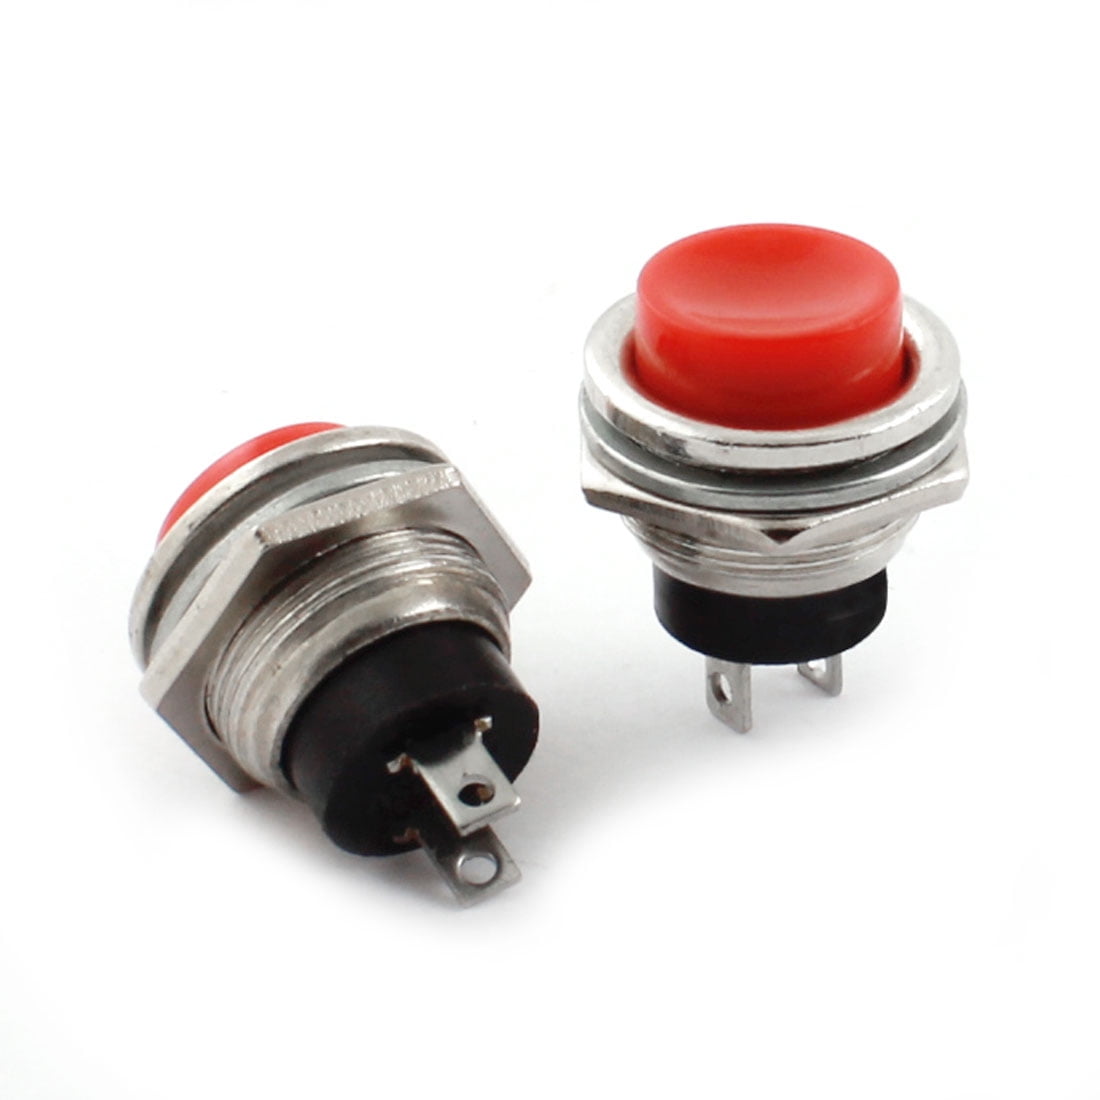 Car Truck Boat Dash Momentary Push Button Switch Black & RED Button fu 